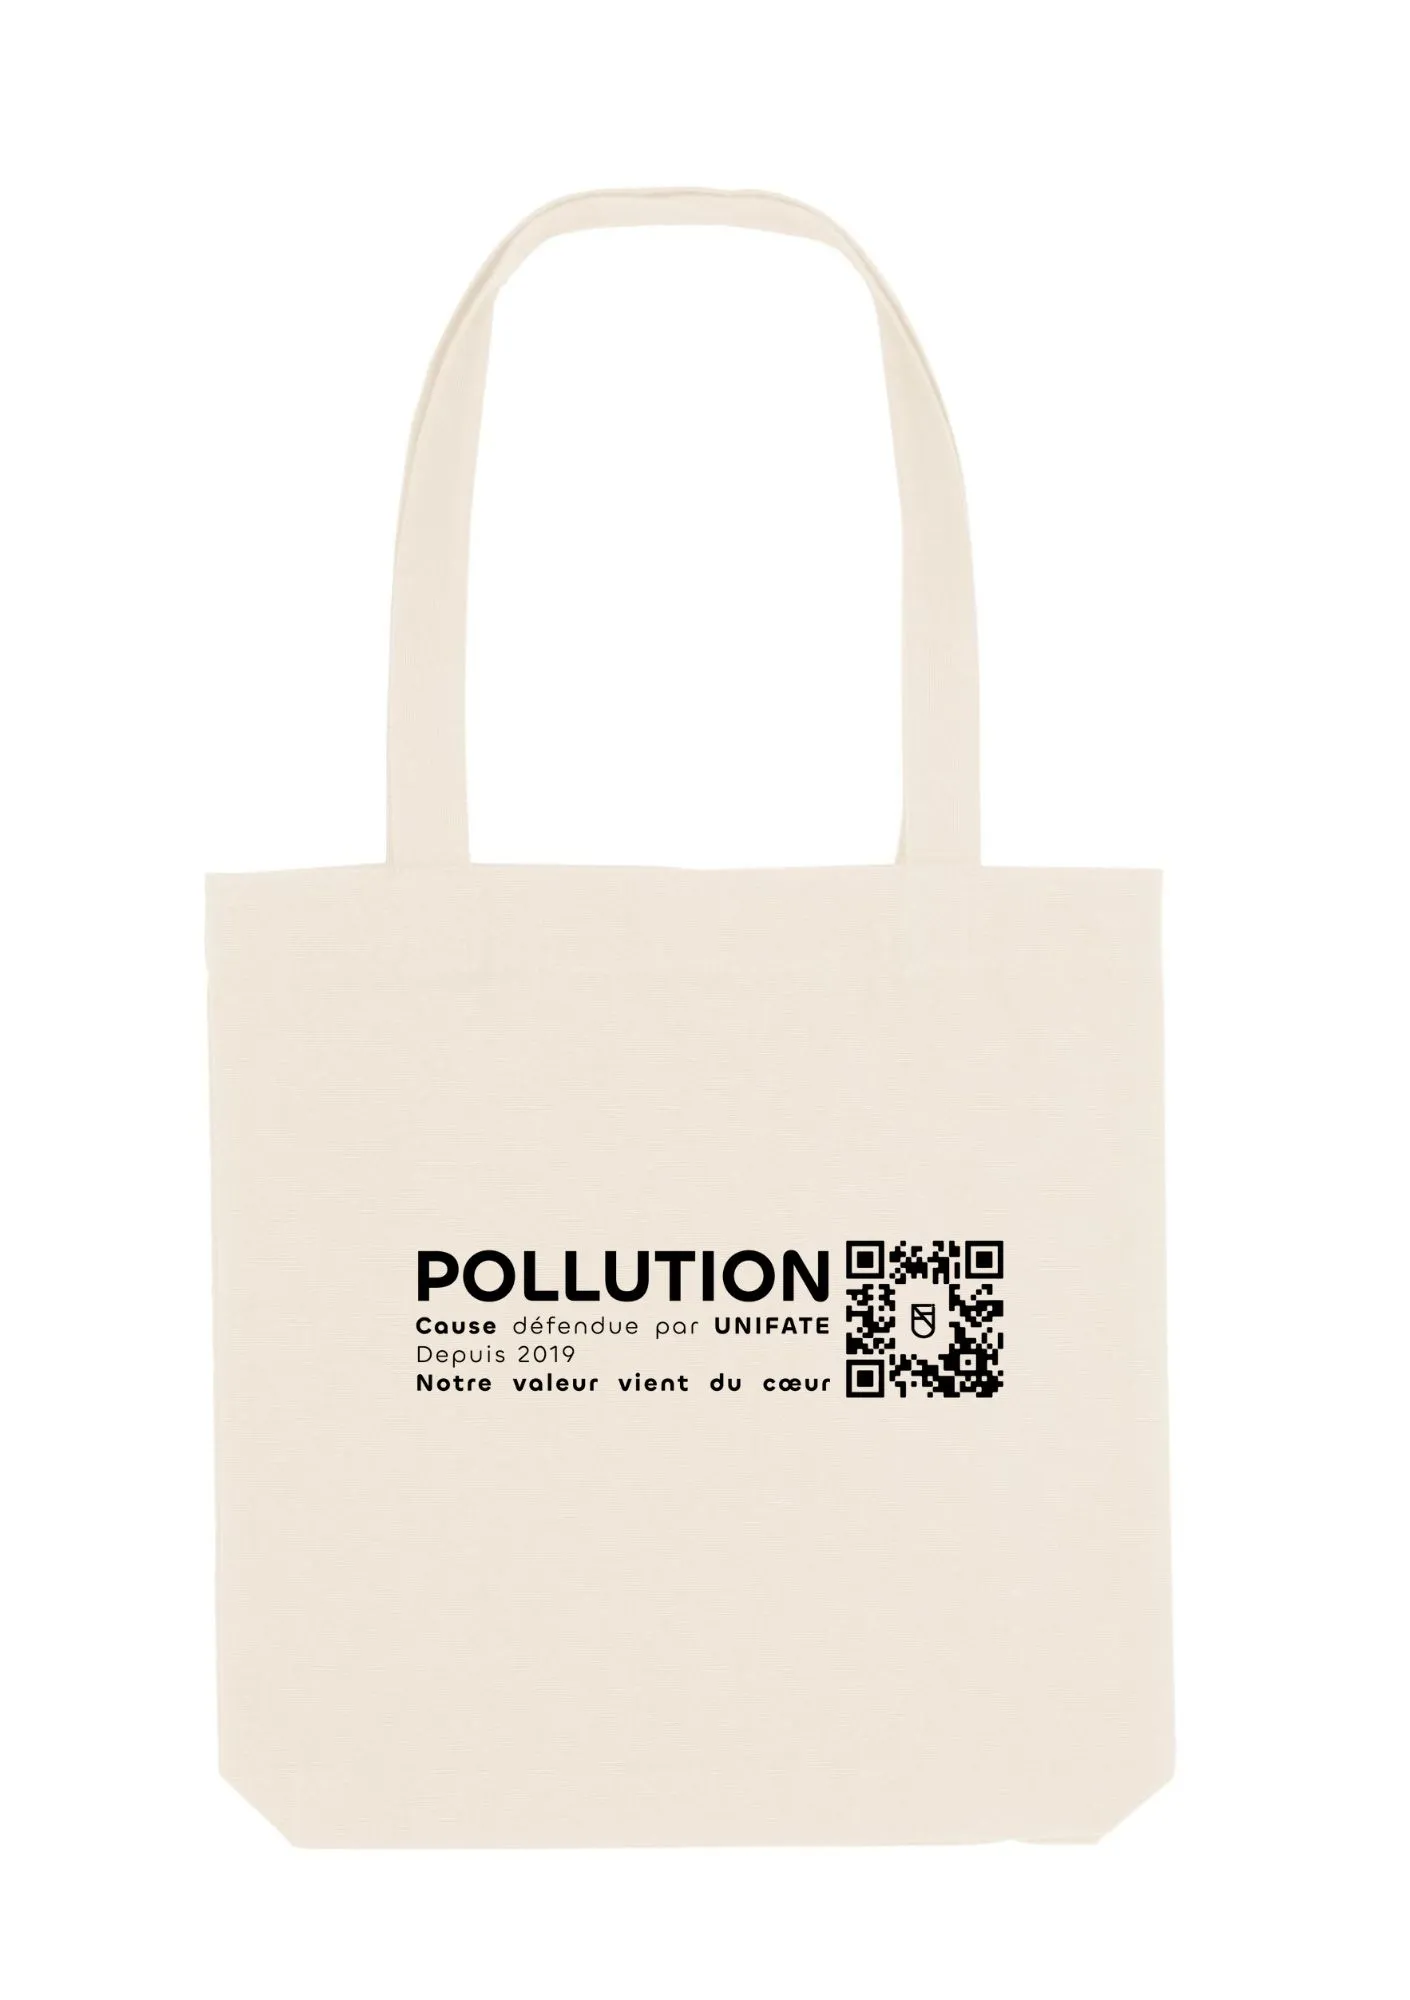 unifate-marque-responsable-rennes-collection-pollution-ete-tote-bag-blanc-verso